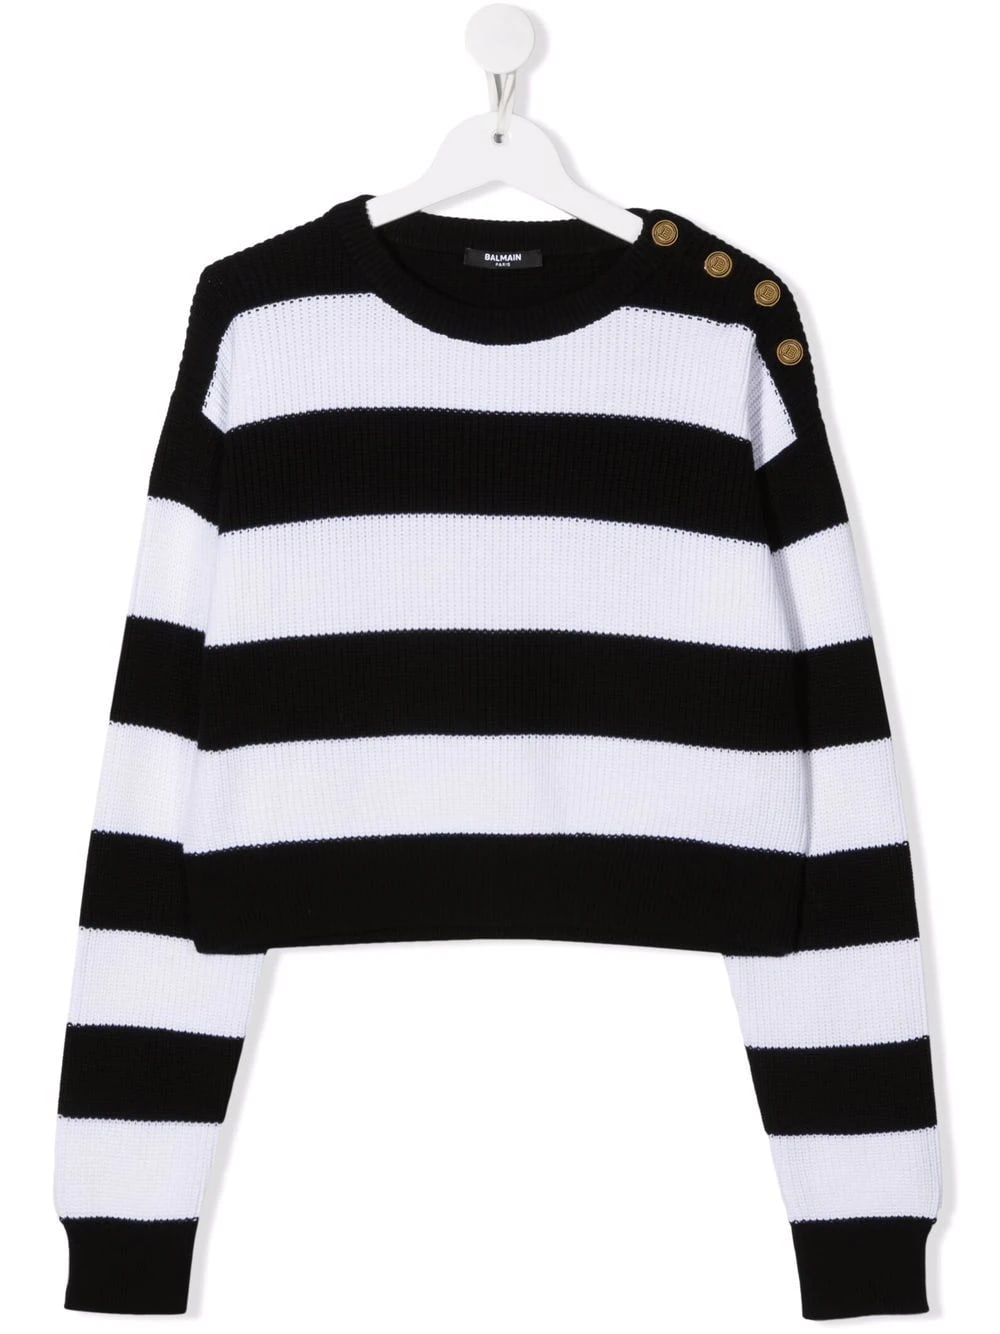 Balmain Kids Black And White Striped Cotton Sweater With Golden Buttons